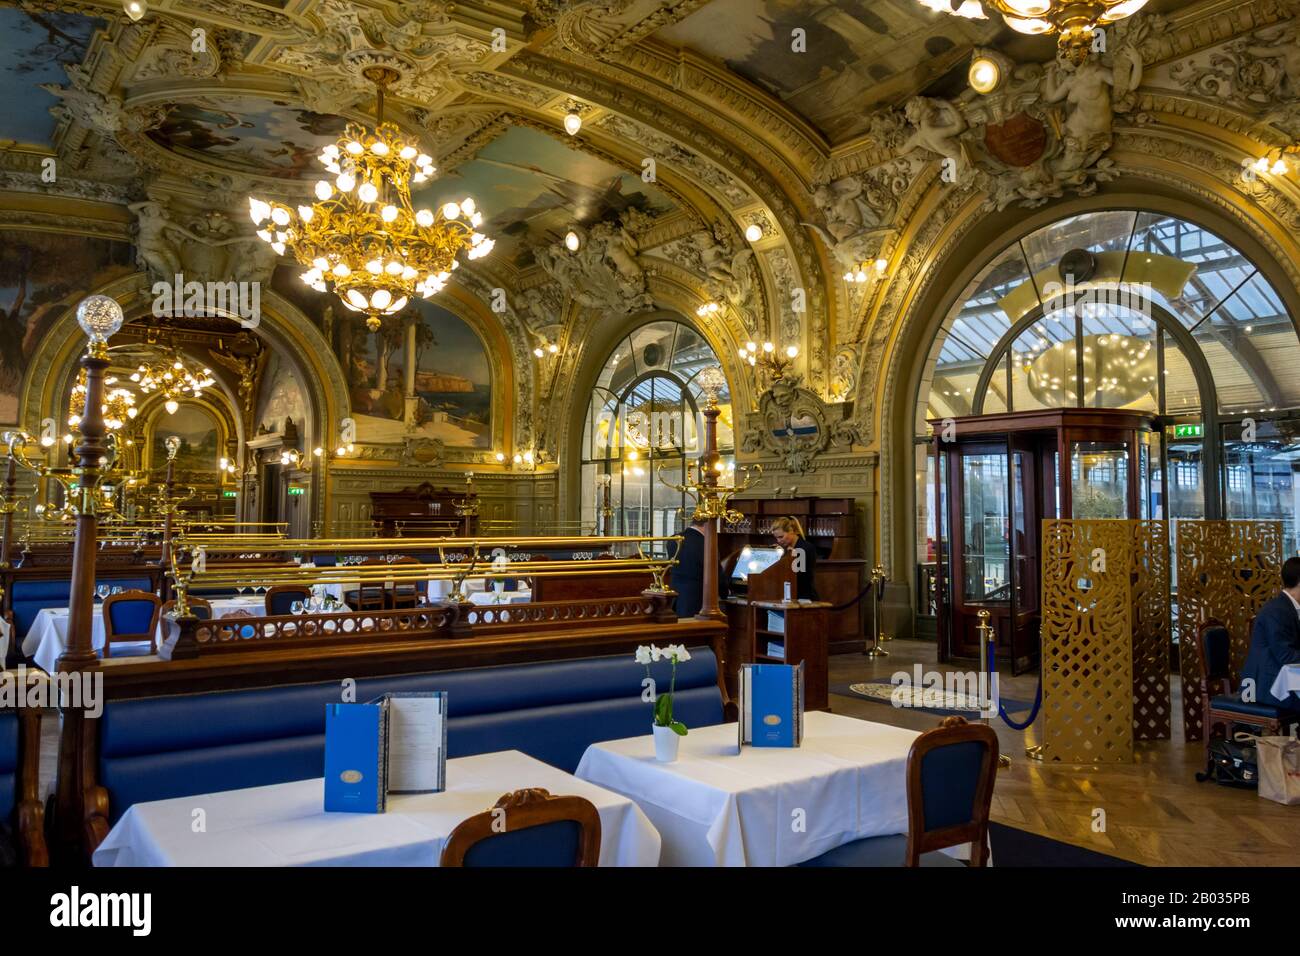 Interior of le Train Bleu, french restaurant located in the Gare de Lyon railway station in Paris. The restaurant was created in 1900. Stock Photo